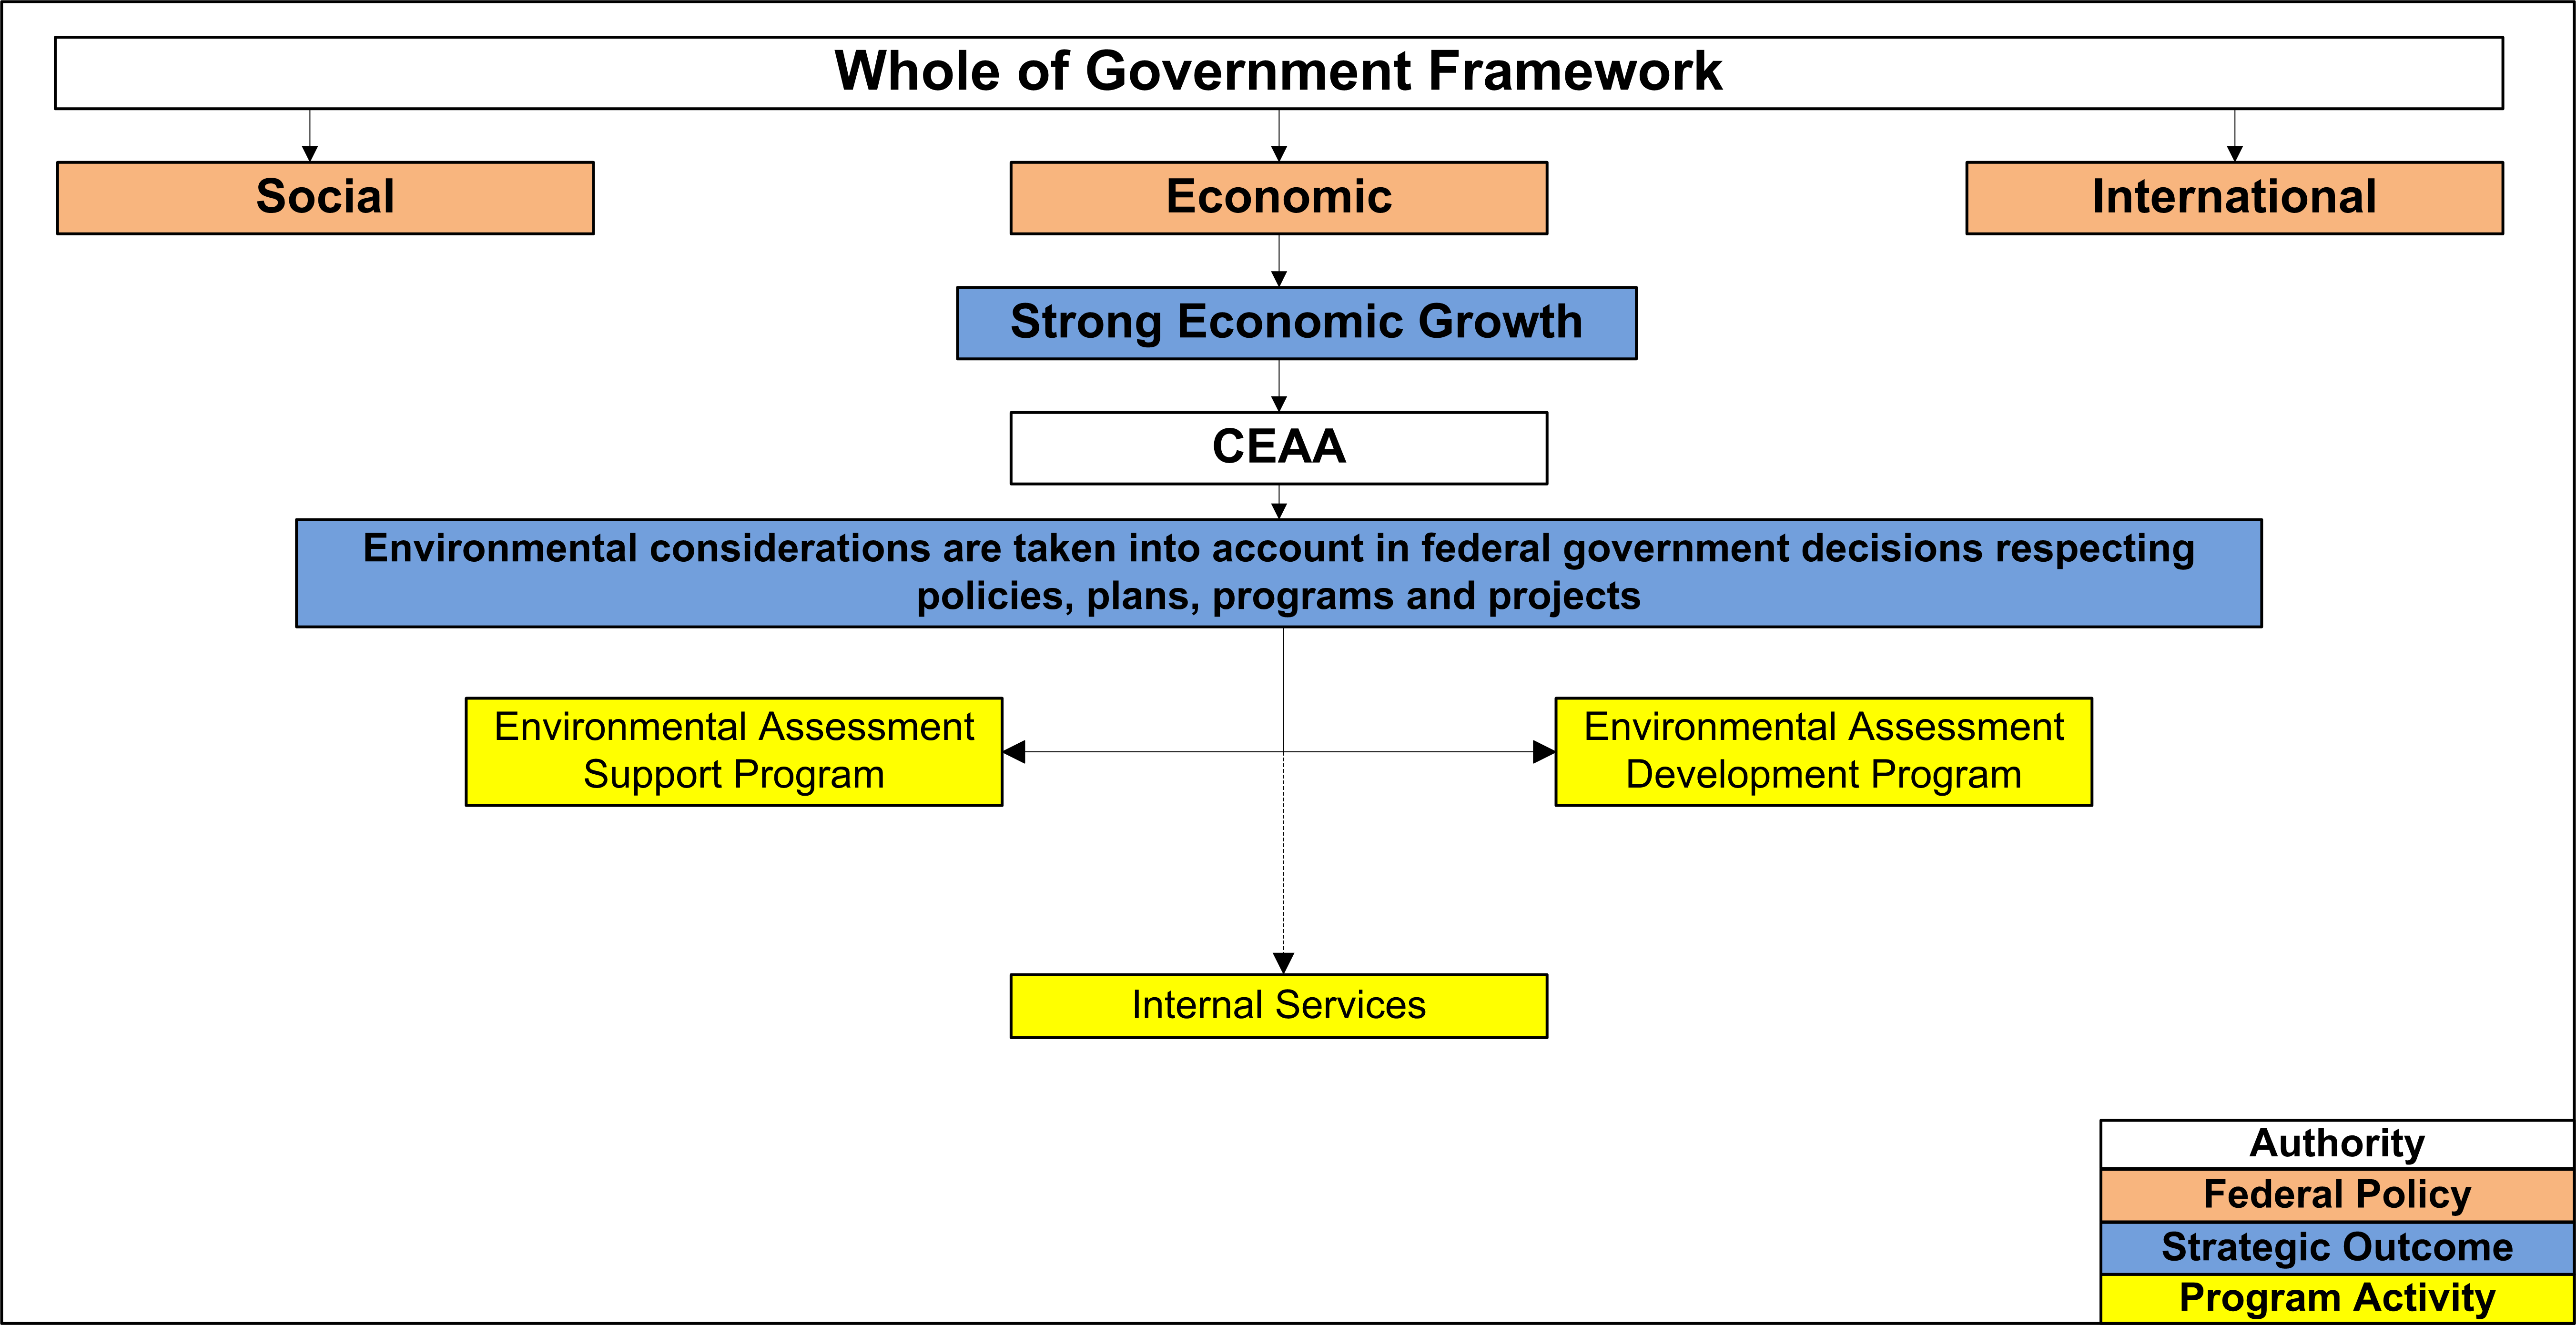 Canadian Environmental Assessment Agency's Program Activity Architecture